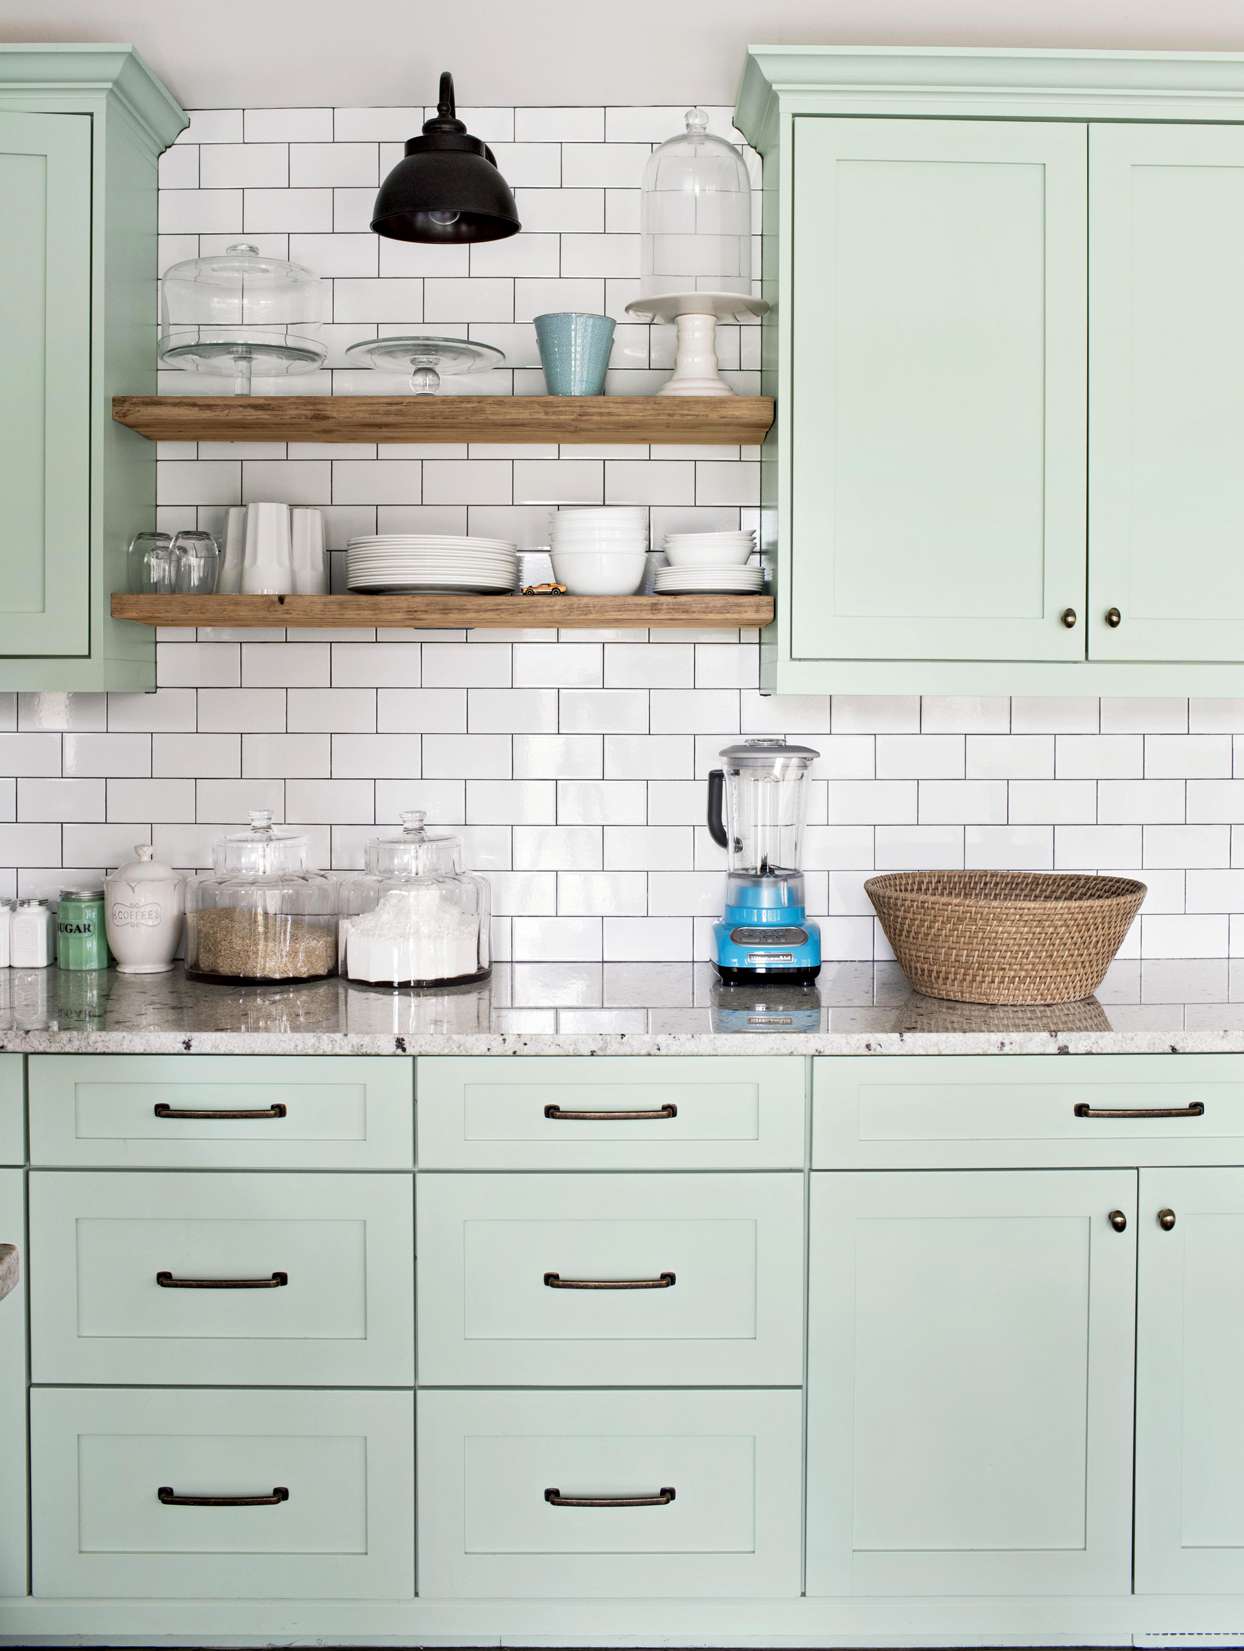 The Best Green Paint Colors For Cabinets According To Experts Better Homes Gardens